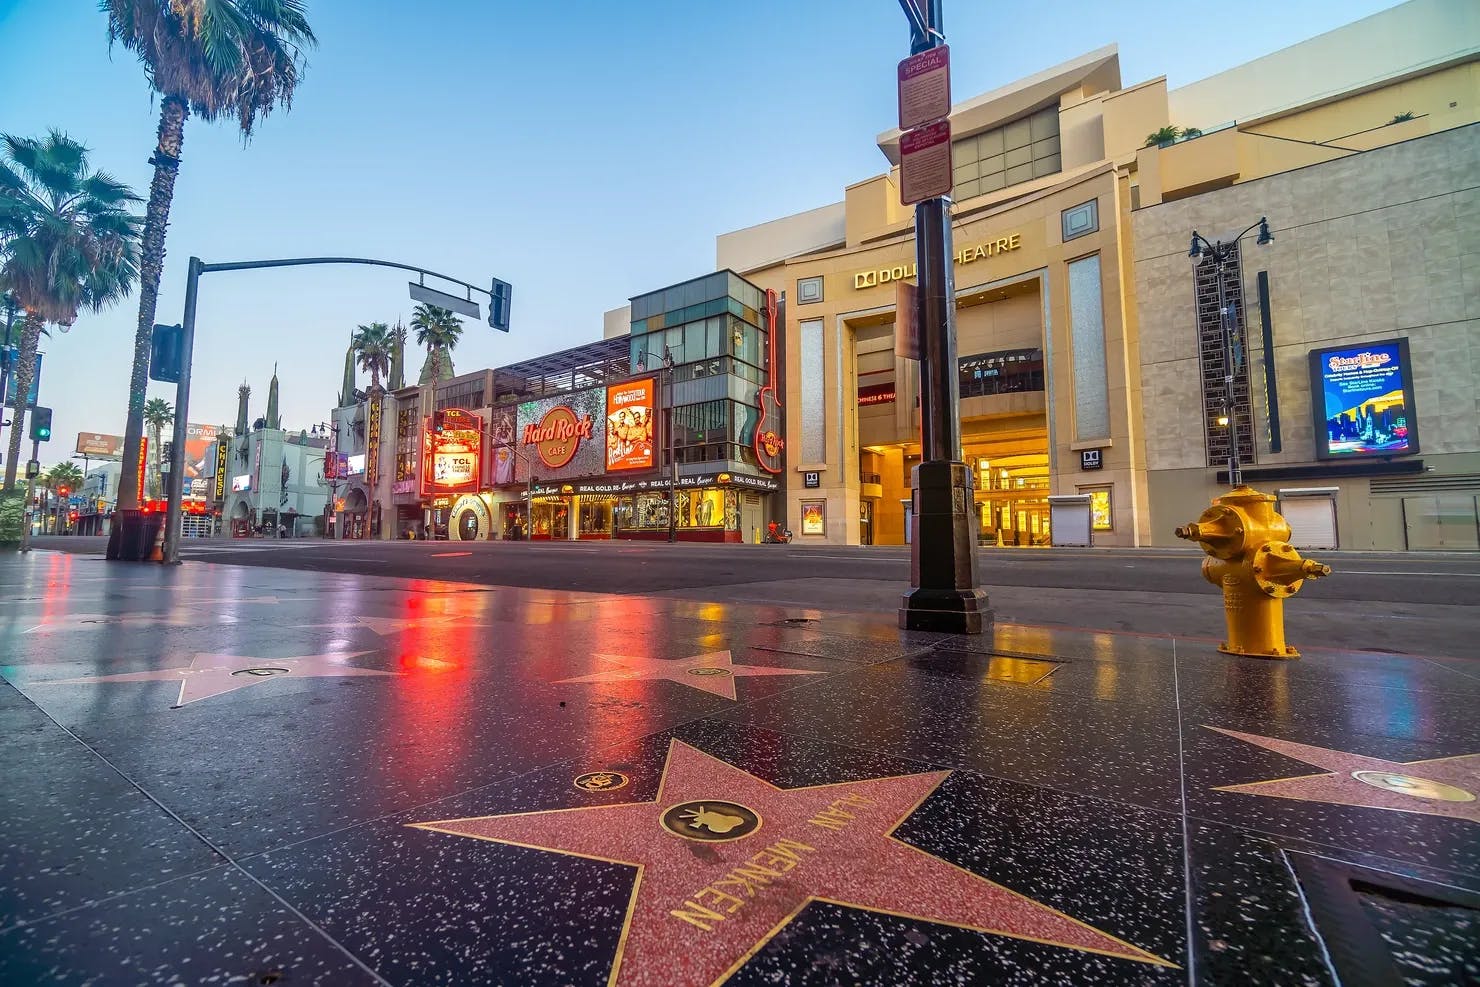 After checking out this attraction for yourself, it’s hard not to feel like you’ve been duped by the allure of celebrity culture. Los Angeles has a lot to offer the savvy traveler, but it’s also riddled with tourist traps. The Walk of Fame feels like the linchpin in the Oso, satisfying for Fey of sights and sounds that Hollywood Boulevard offers. They draw a bunch of celebrity names etched on the sidewalk. It’s an underwhelming way to try and feel a close connection to your favorite stars, but don’t worry... You’re sure to feel overwhelmed by the street performers, souvenir shops, vendors, and tour guides who’ve set up shop there. 